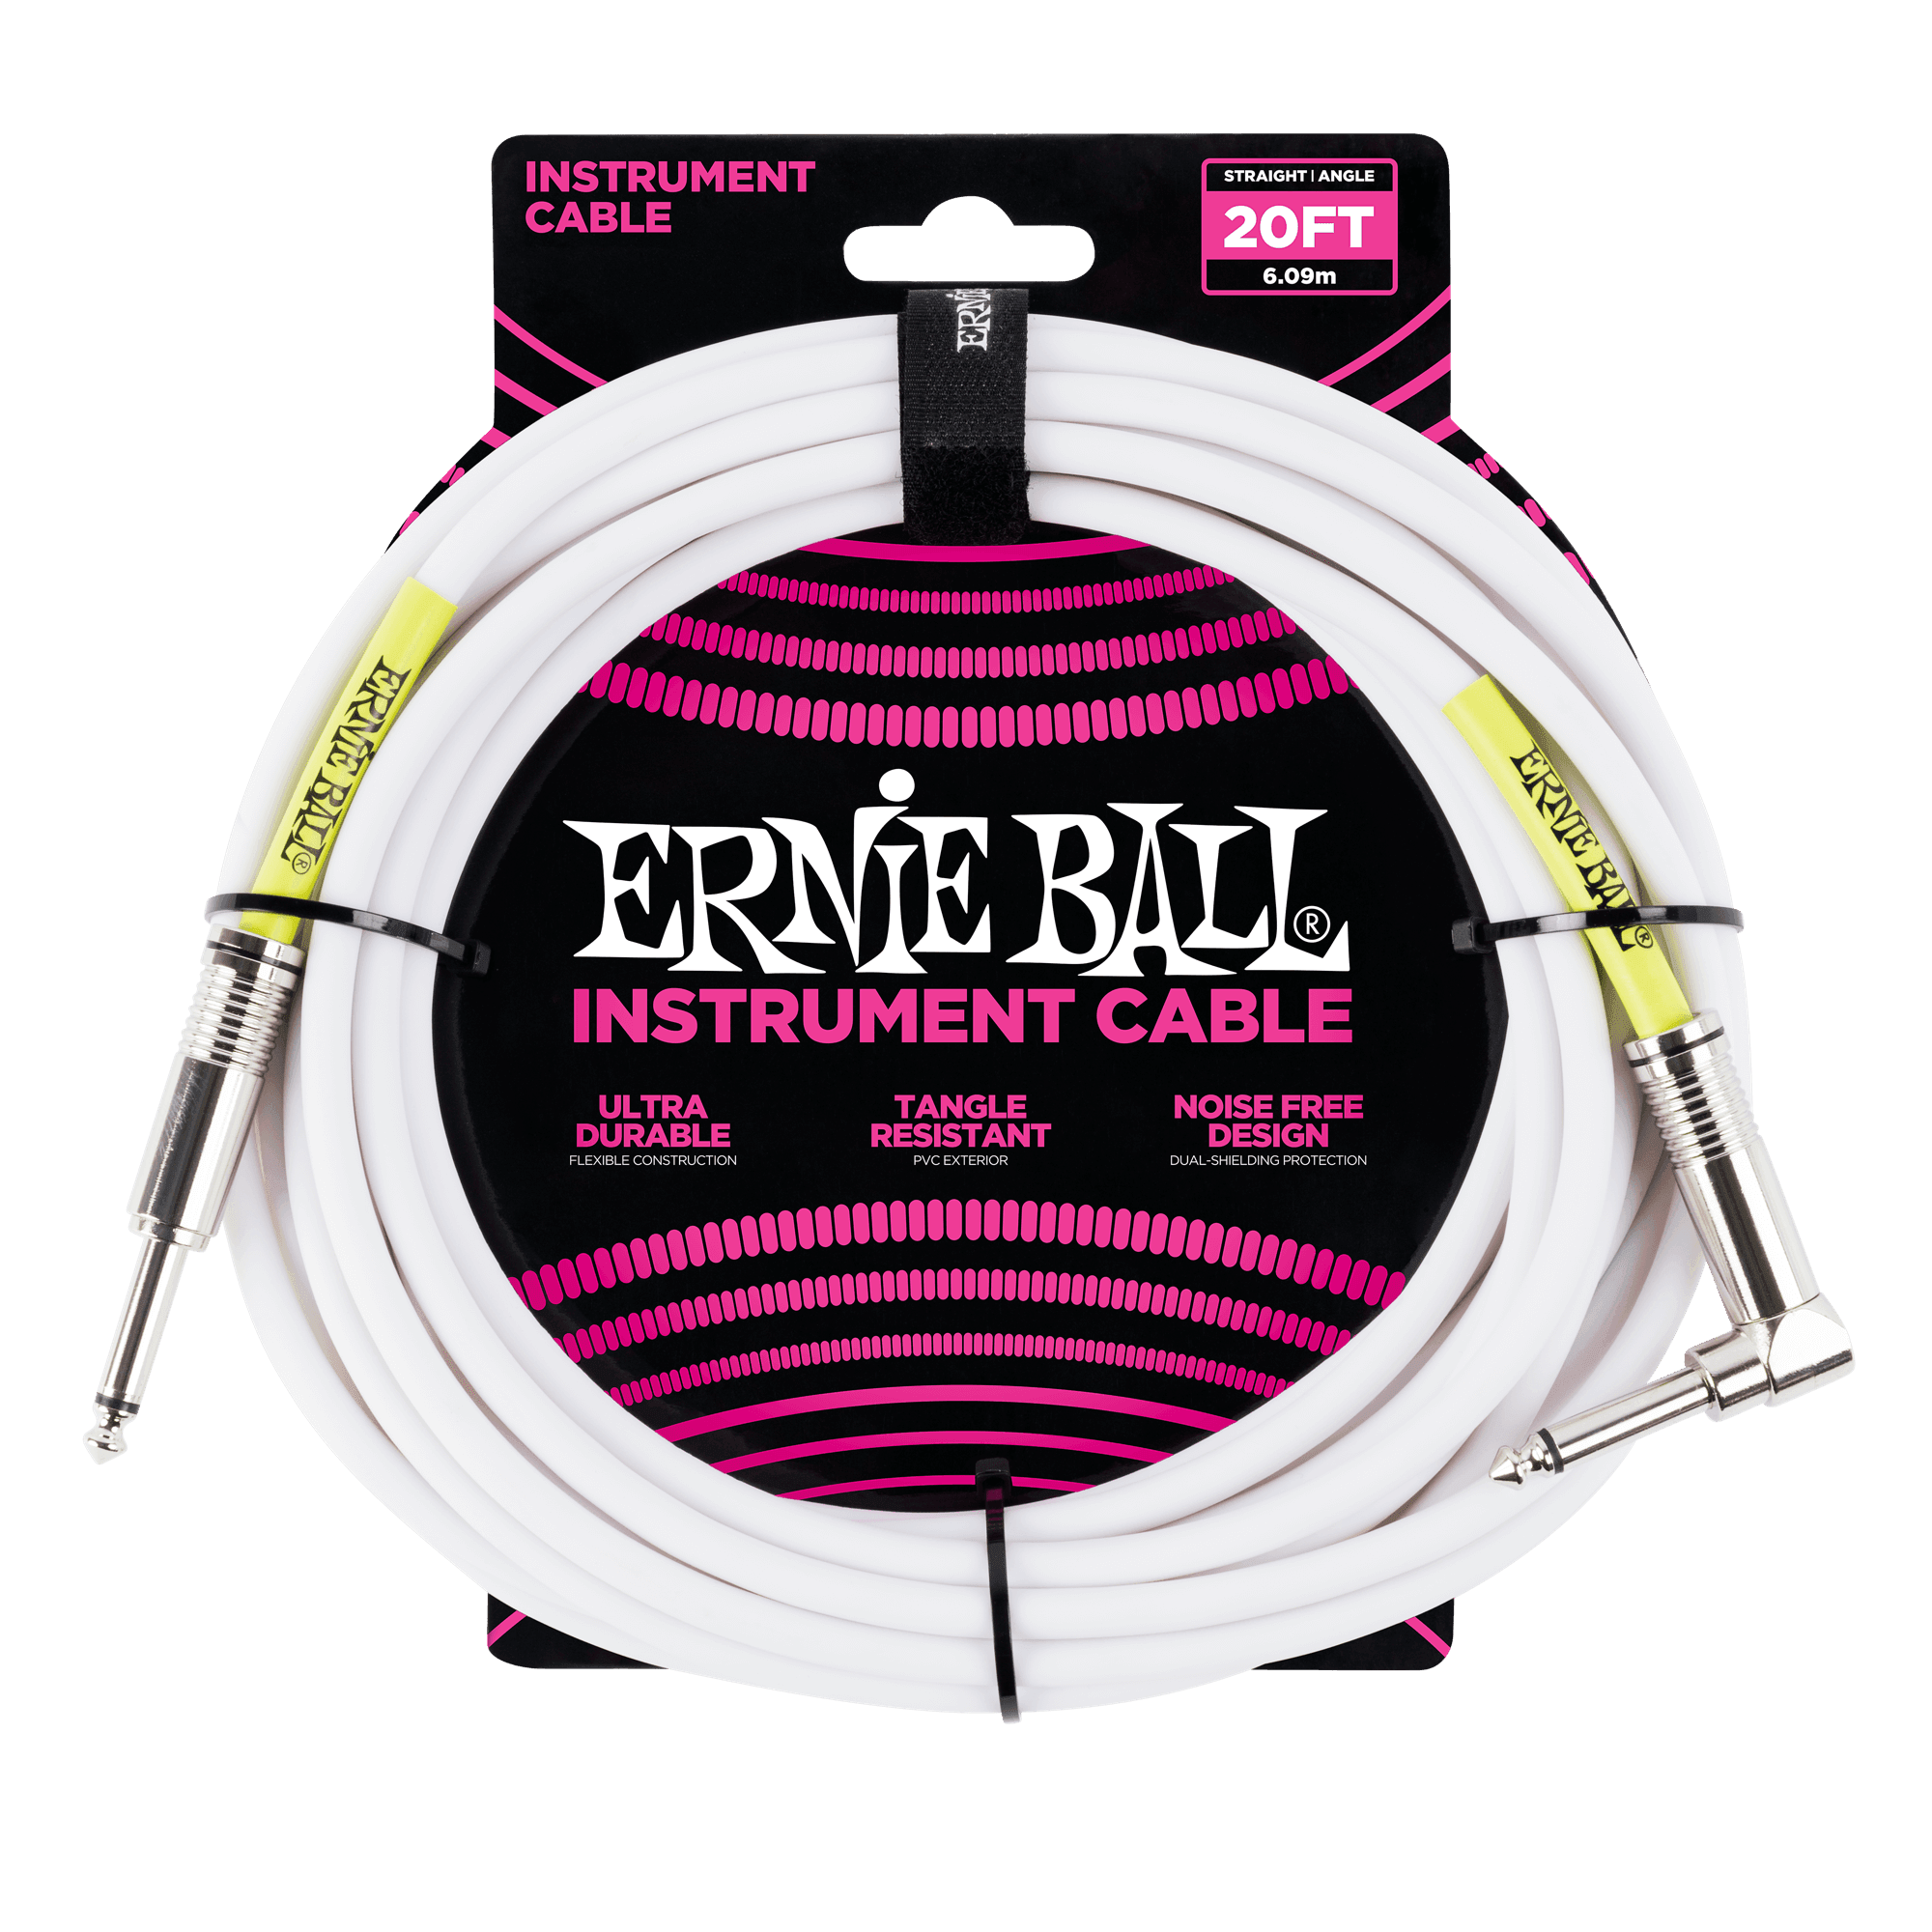 Ernie Ball - 6m White Ultraflex Straight/Angle Instrument Cable - Accessories - Cables & Adaptors by Ernie Ball at Muso's Stuff